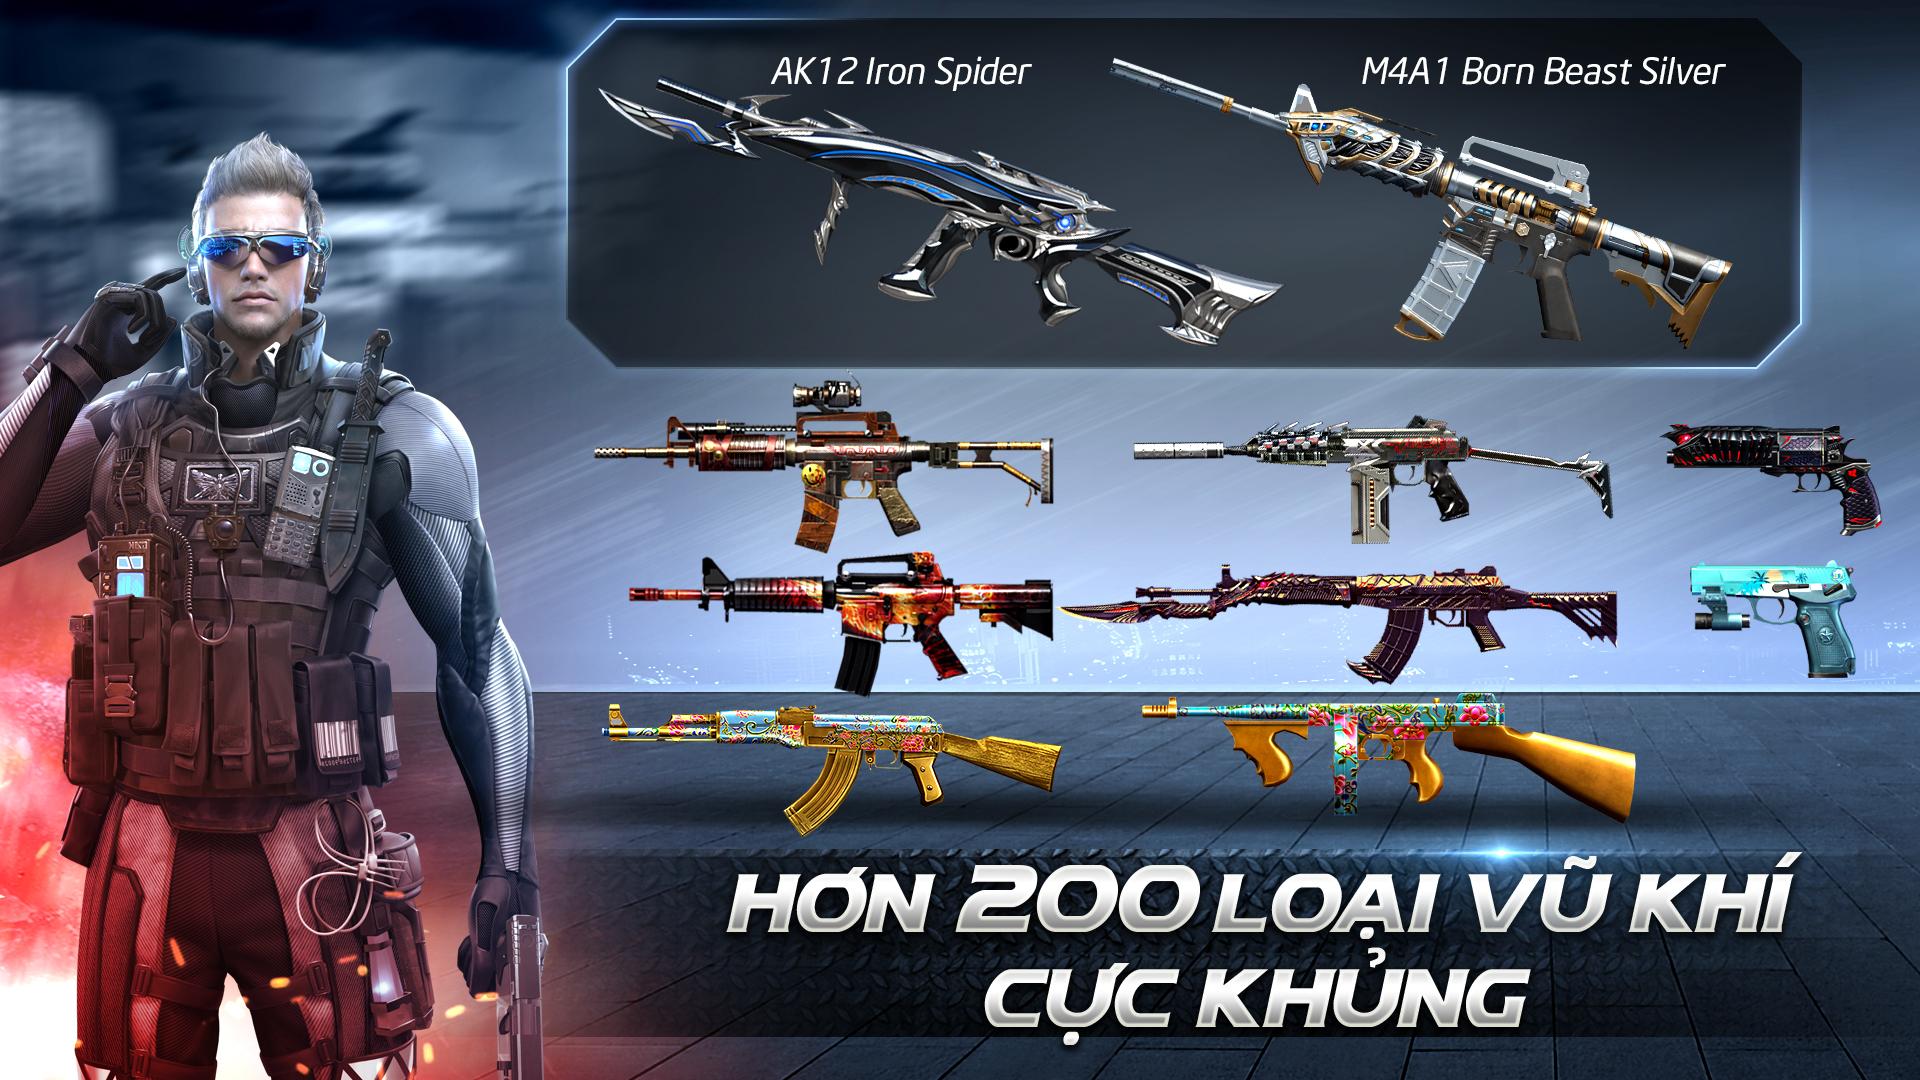 CrossFire: Legends for Android - APK Download - 